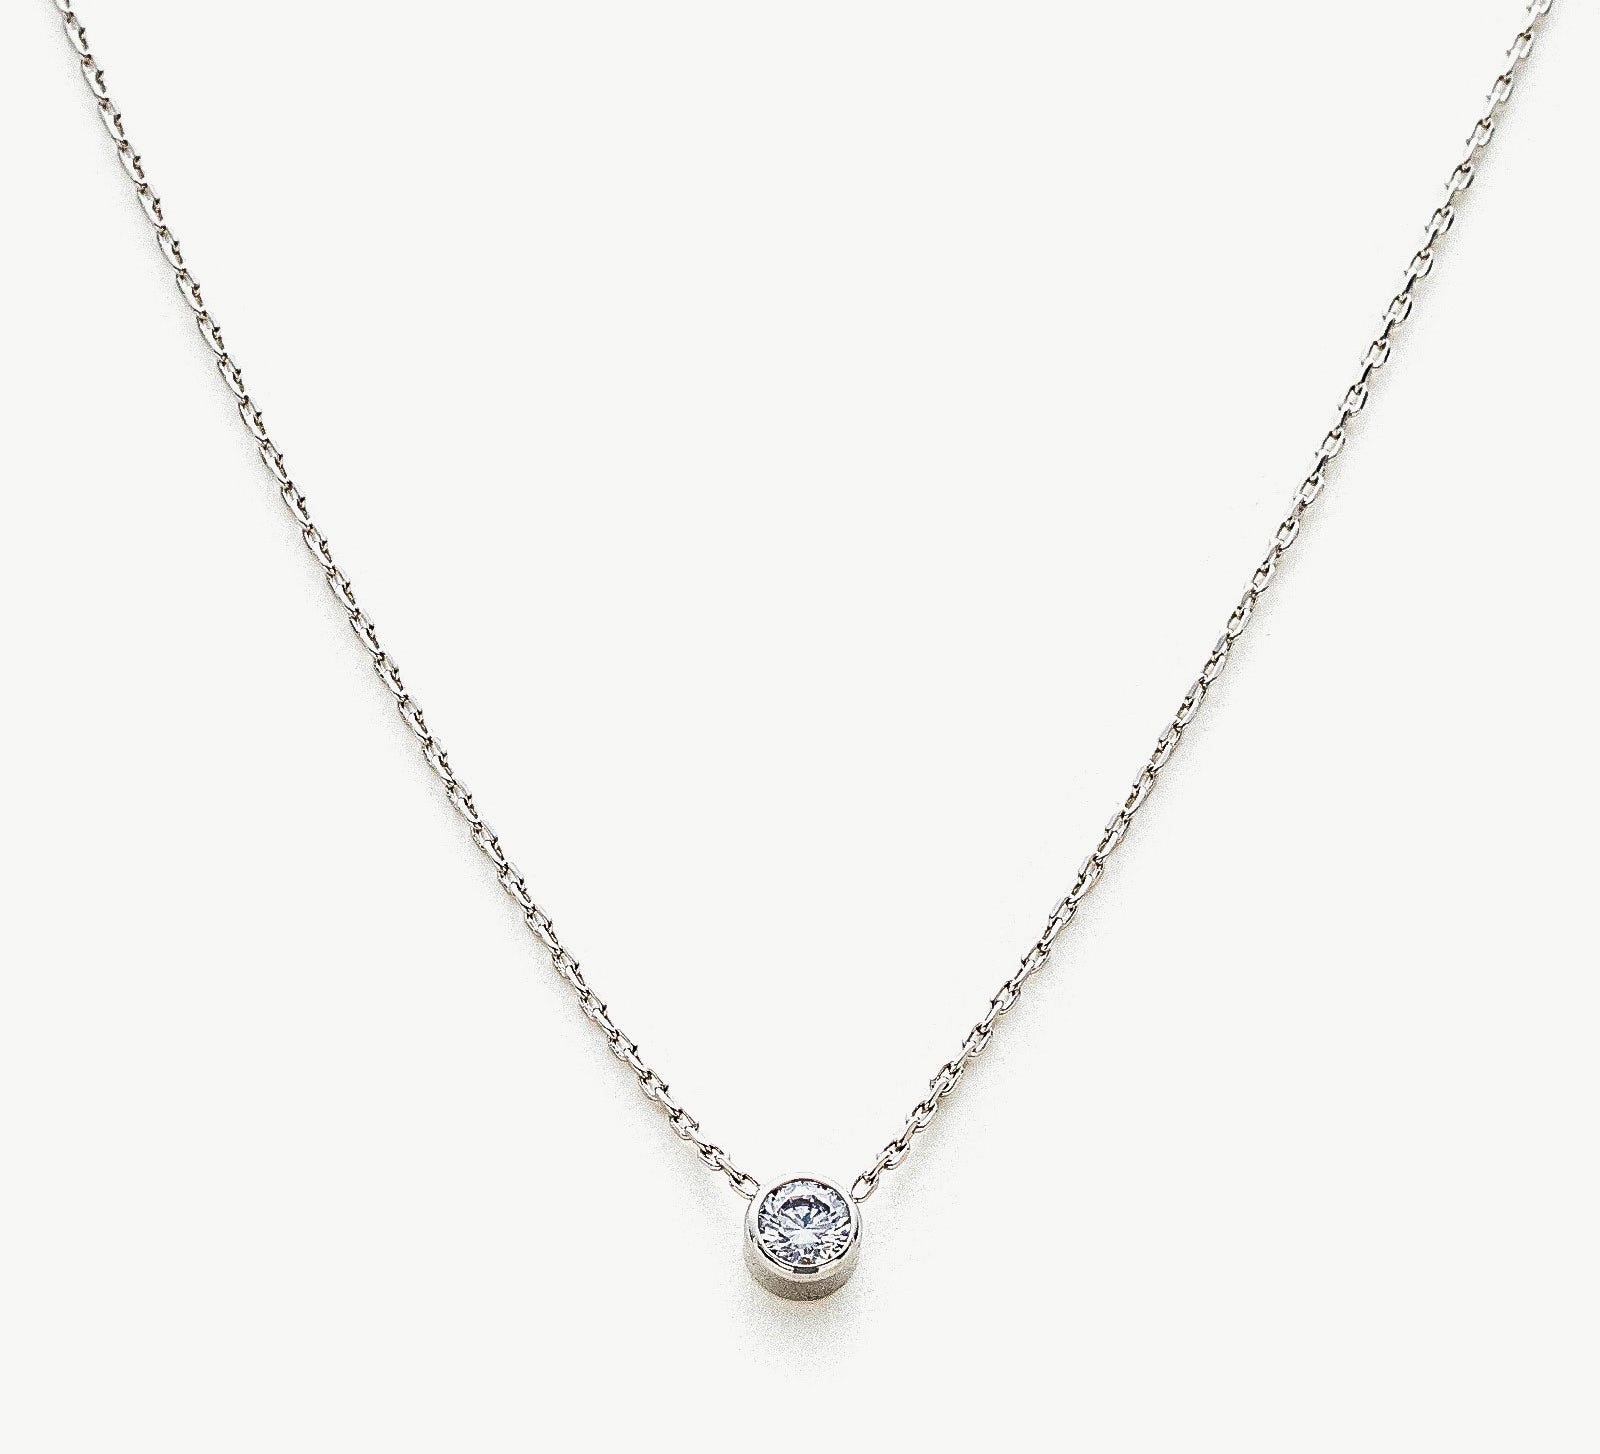 Platinum Crystal Pendant Necklace, unveiling the grace of platinum, this necklace features a mesmerizing crystal pendant in a rich platinum hue, creating a captivating and versatile accessory